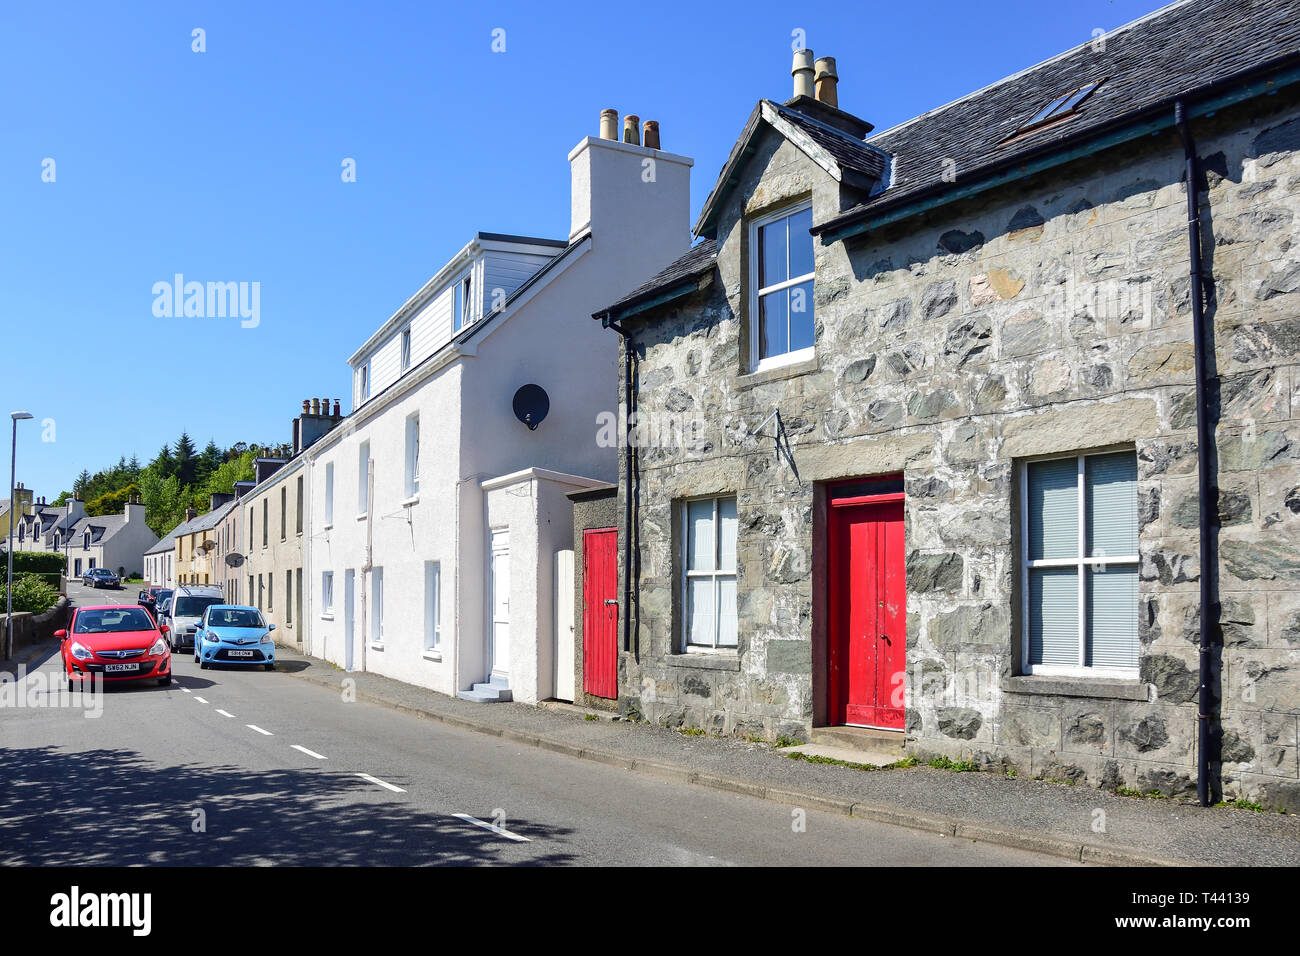 Main Street, Tarbert (Tairbeart), Isle of Harris, Outer Hebrides, Na h-Eileanan Siar, Ecosse, Royaume-Uni Banque D'Images